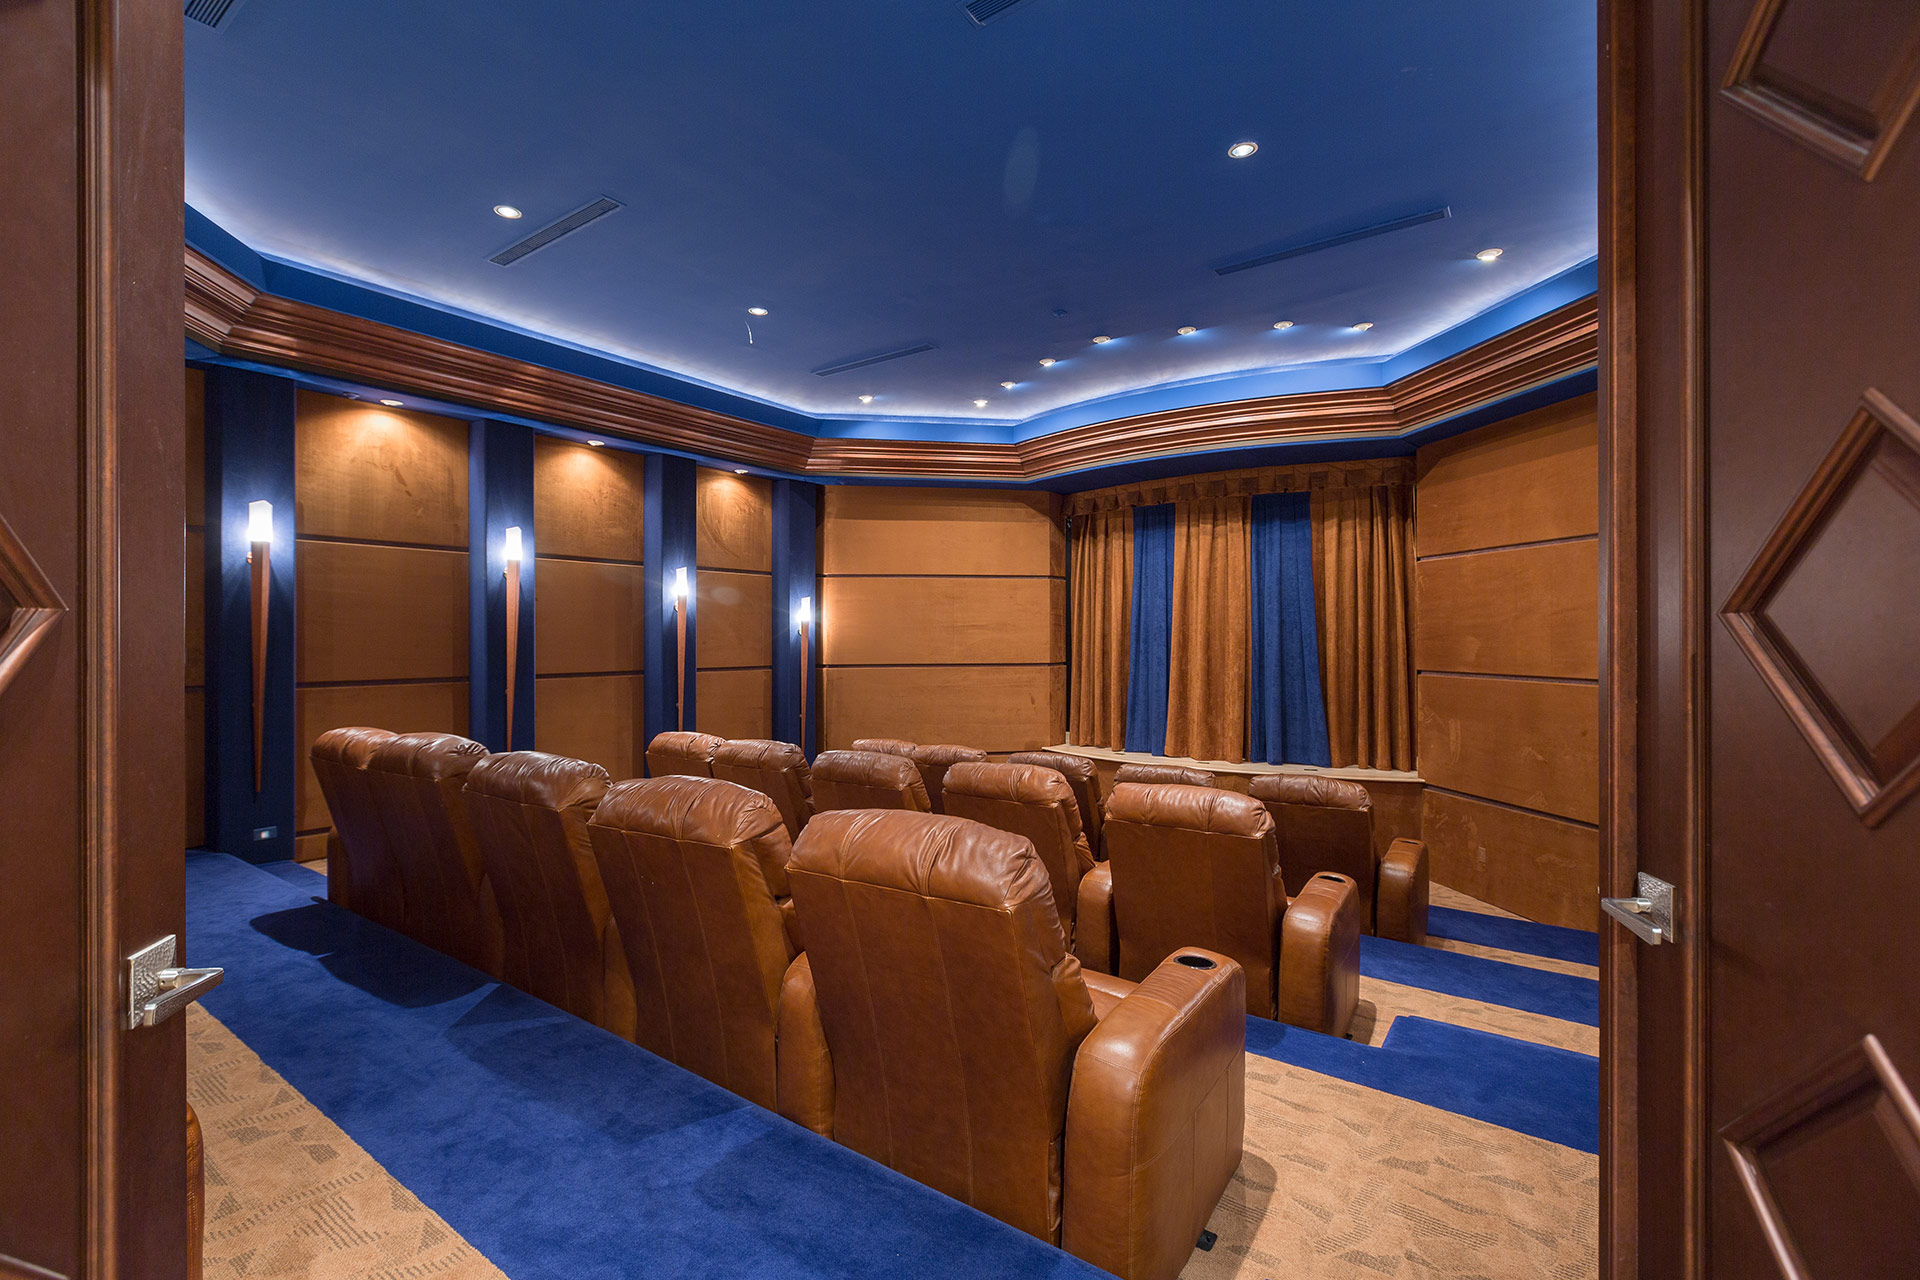 Double doors opening to a home theater with brown recliners, blue ceiling, blue and tan carpet and a blue a brown curtain covering the screen.